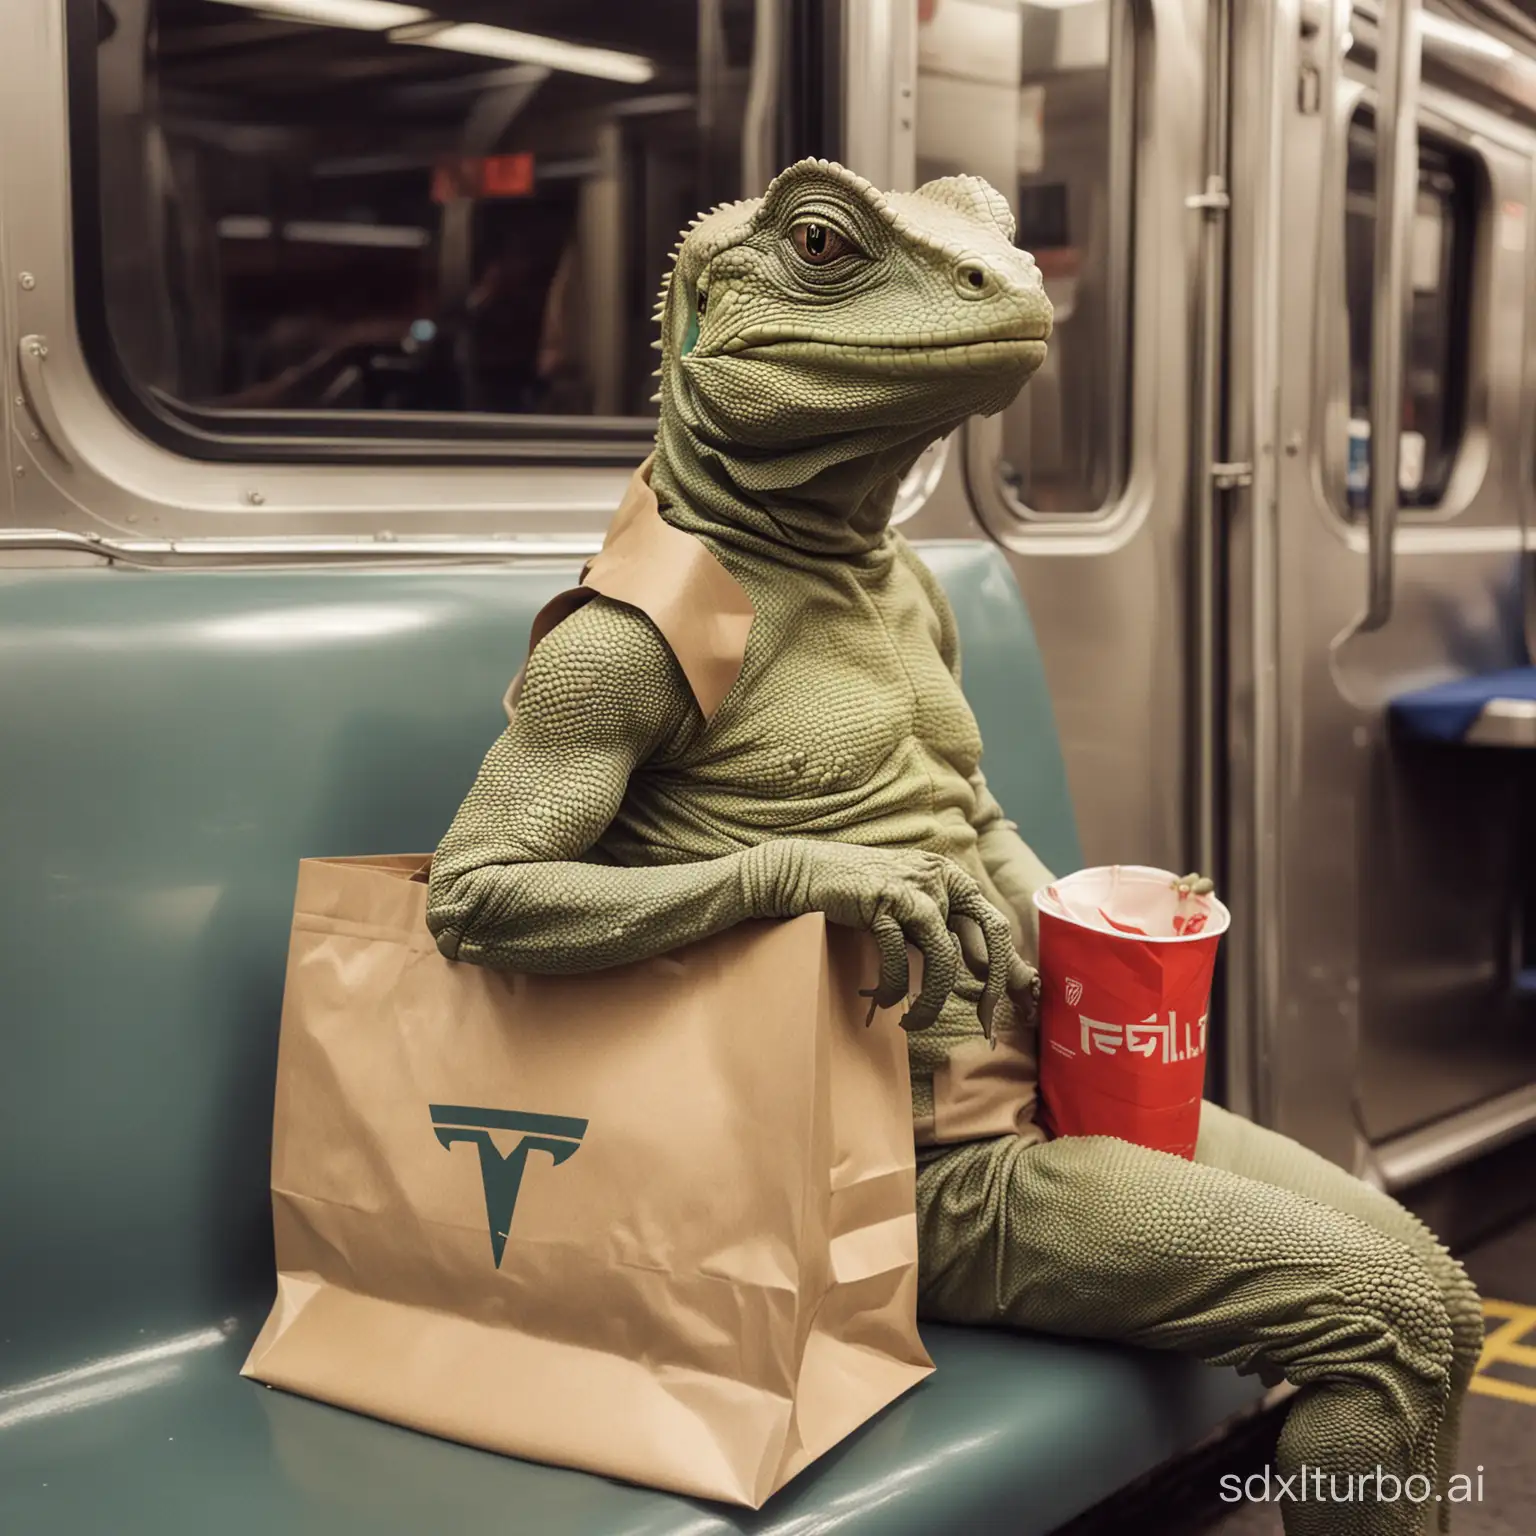 Portrait photograph of an anthropomorphic lizard seated on a New York City subway train，Holding Tesla shopping bag